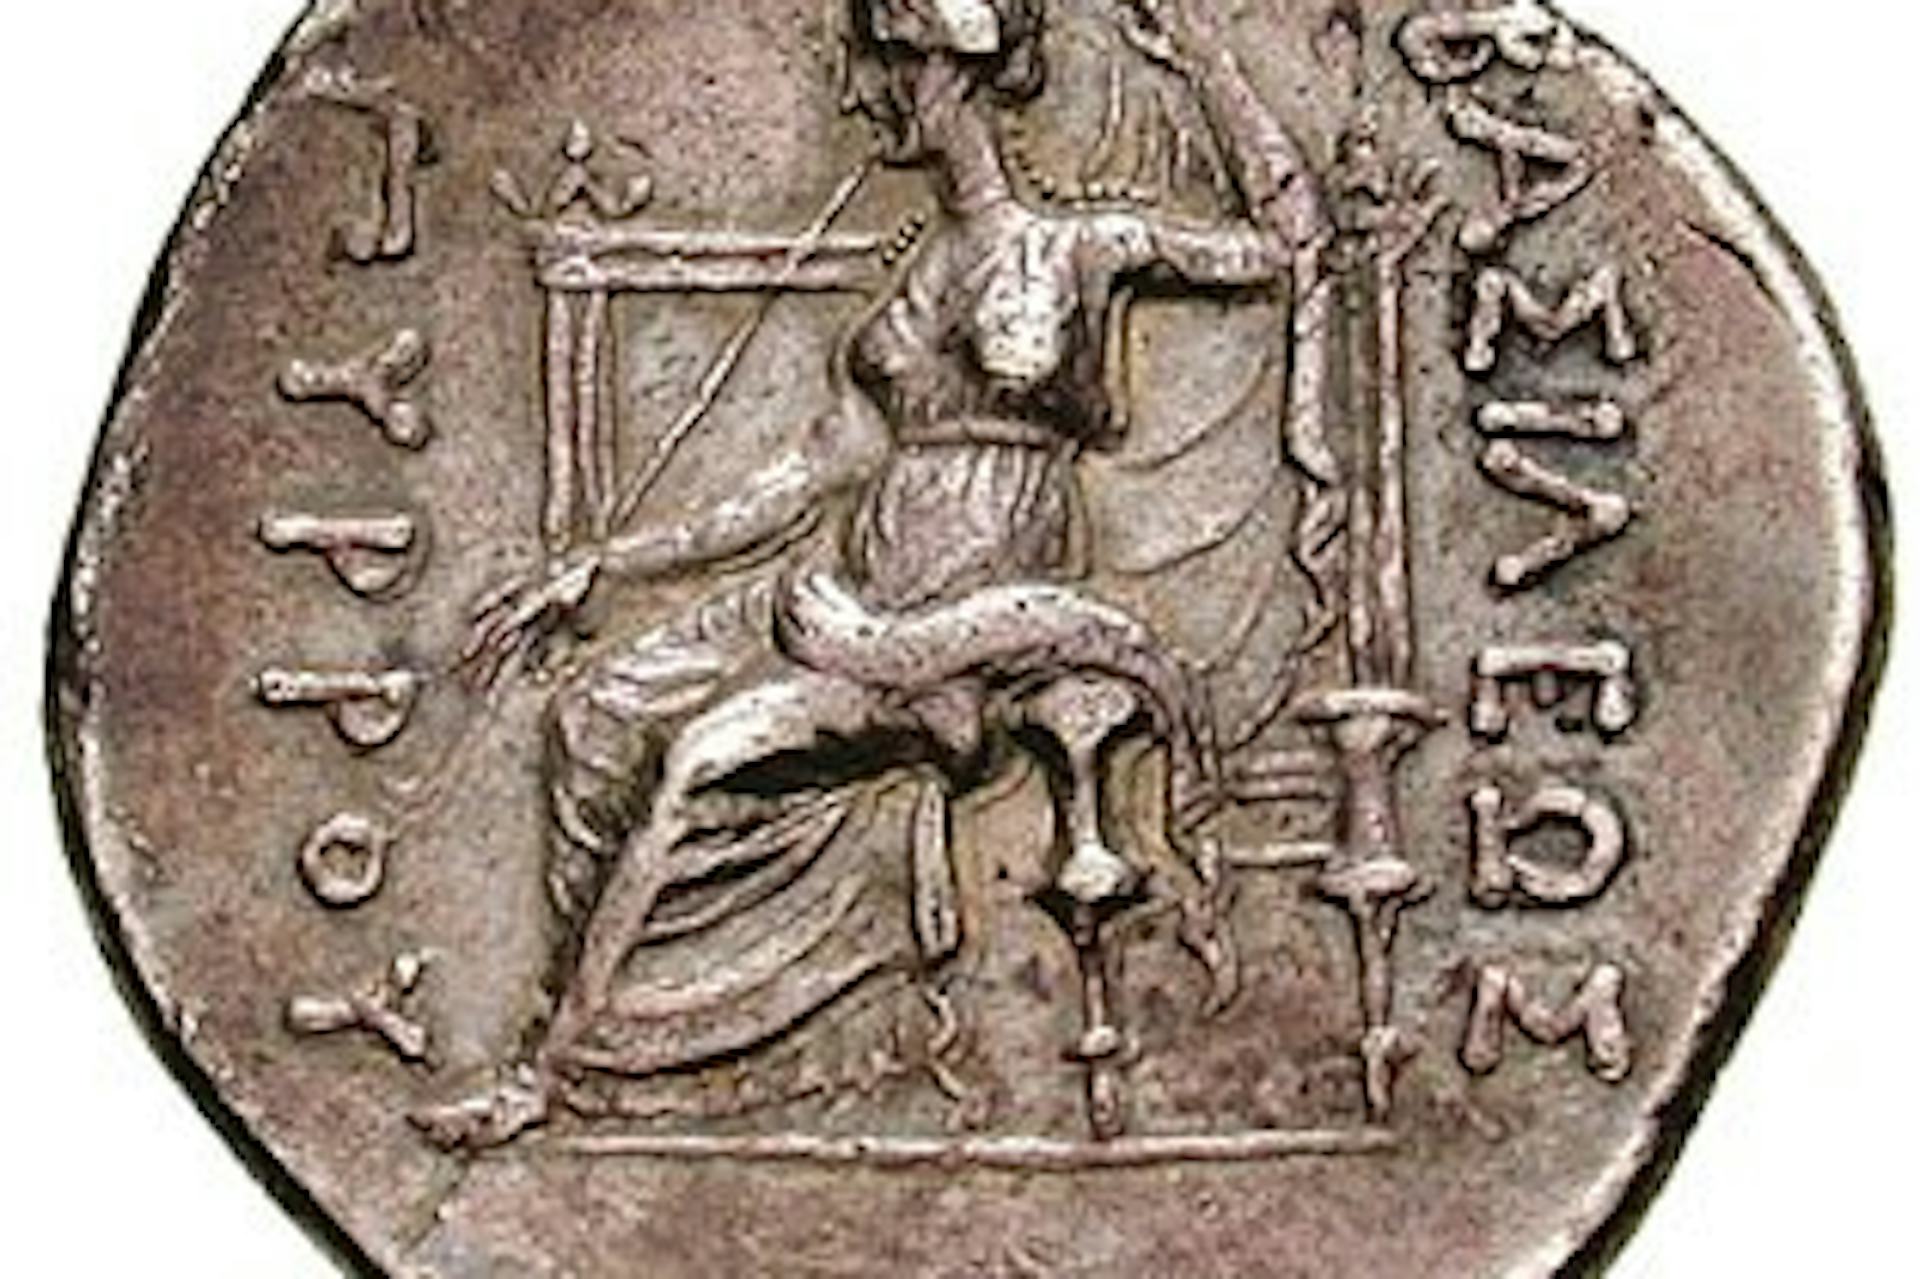 Reverse of coin showing Dione